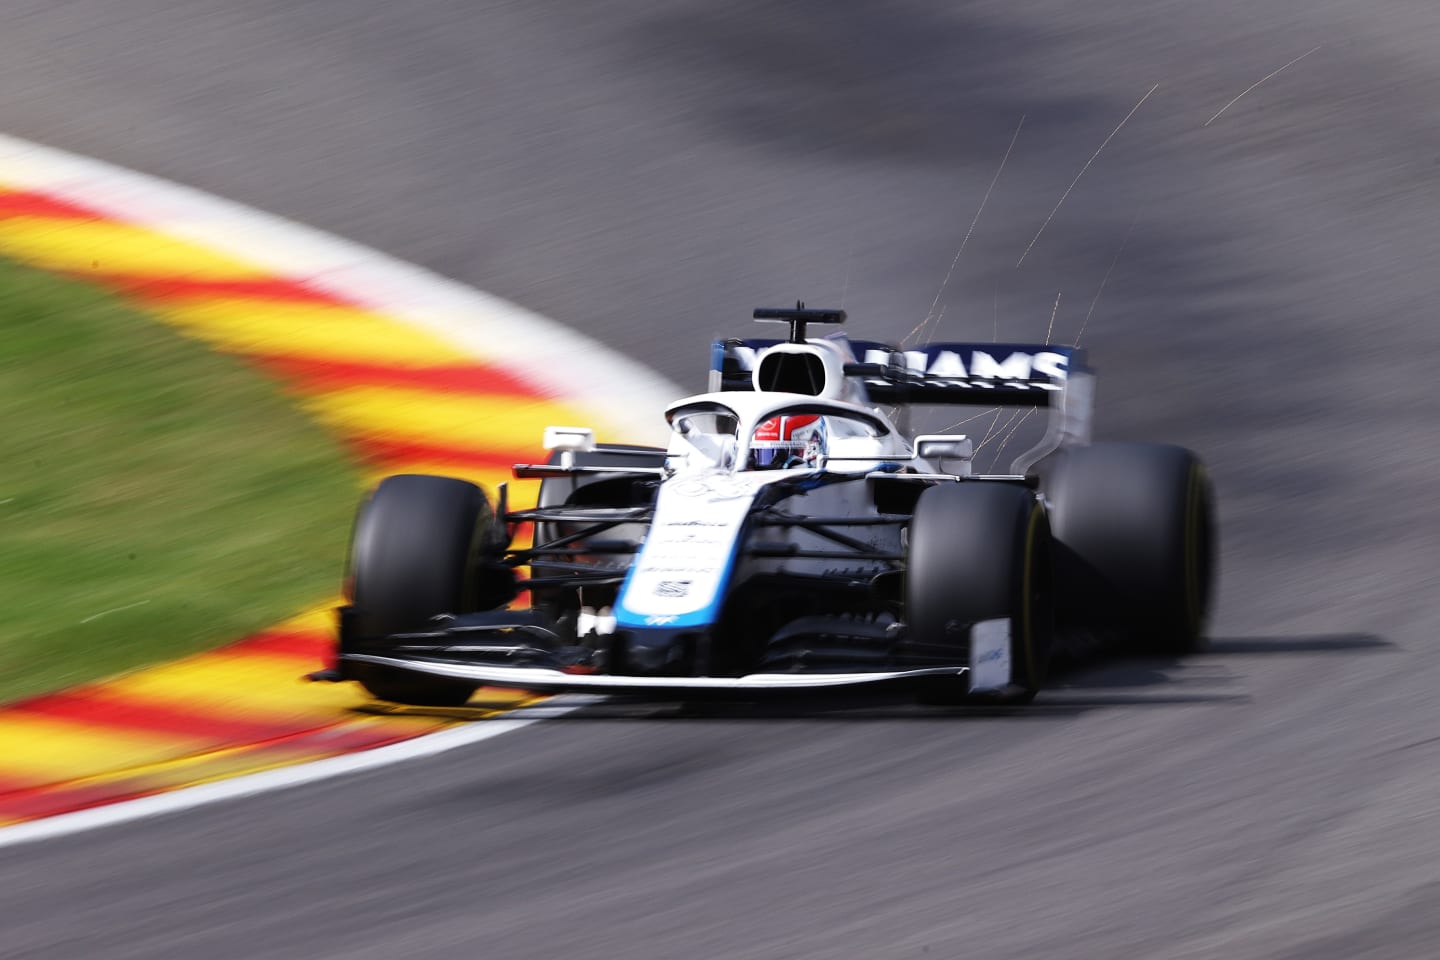 SPA, BELGIUM - AUGUST 30: George Russell of Great Britain driving the (63) Williams Racing FW43 Mercedes on track during the F1 Grand Prix of Belgium at Circuit de Spa-Francorchamps on August 30, 2020 in Spa, Belgium. (Photo by Lars Baron/Getty Images)